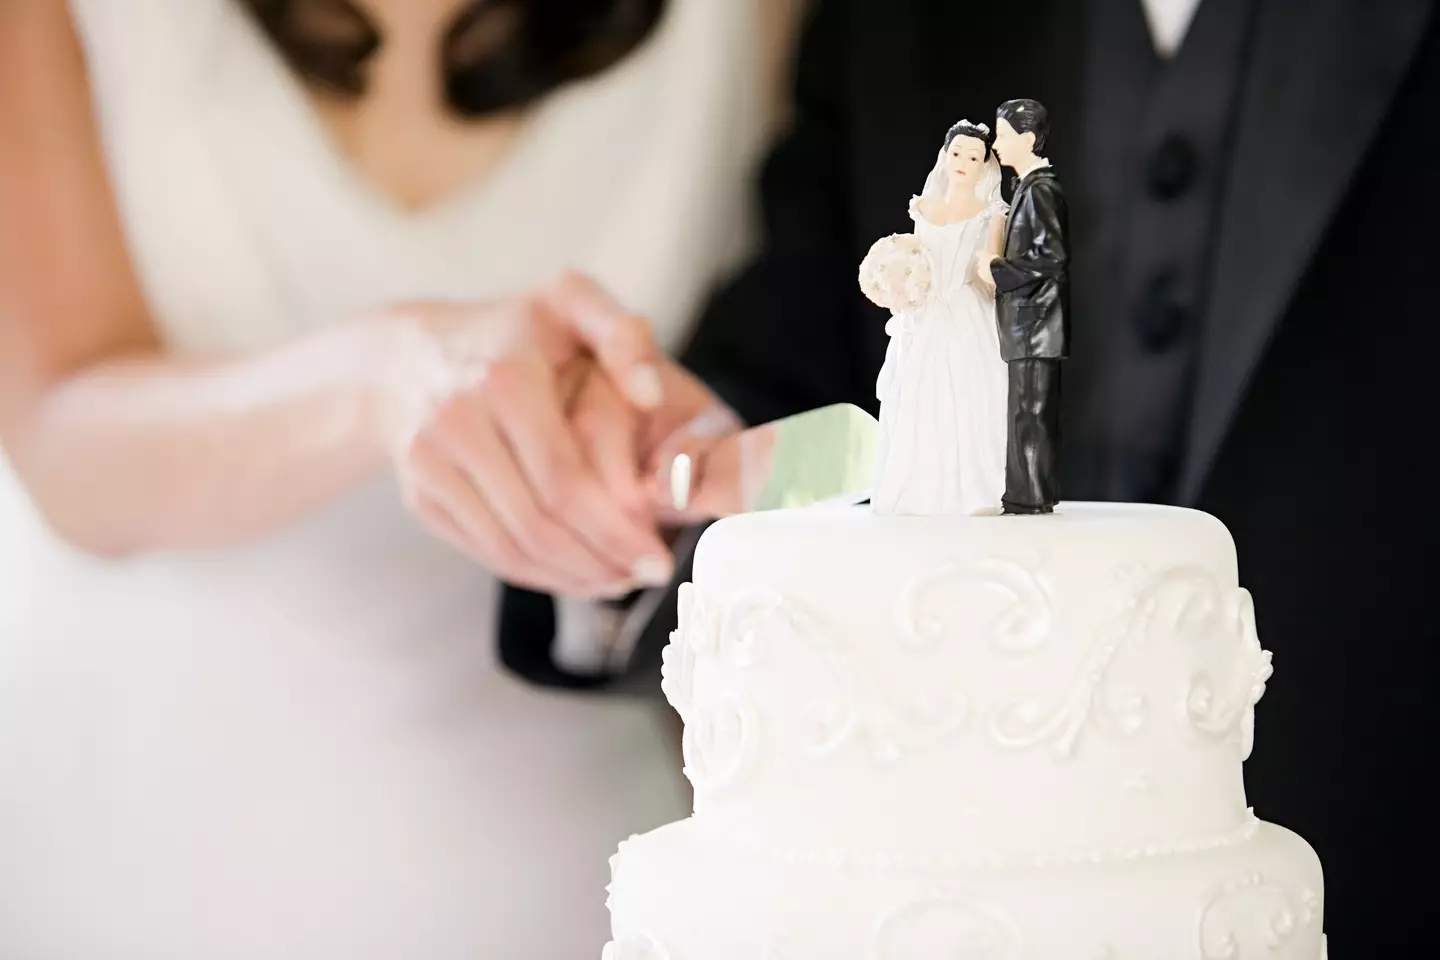 He smashed her face into the cake and destroyed it. (Image Source / Getty Images)